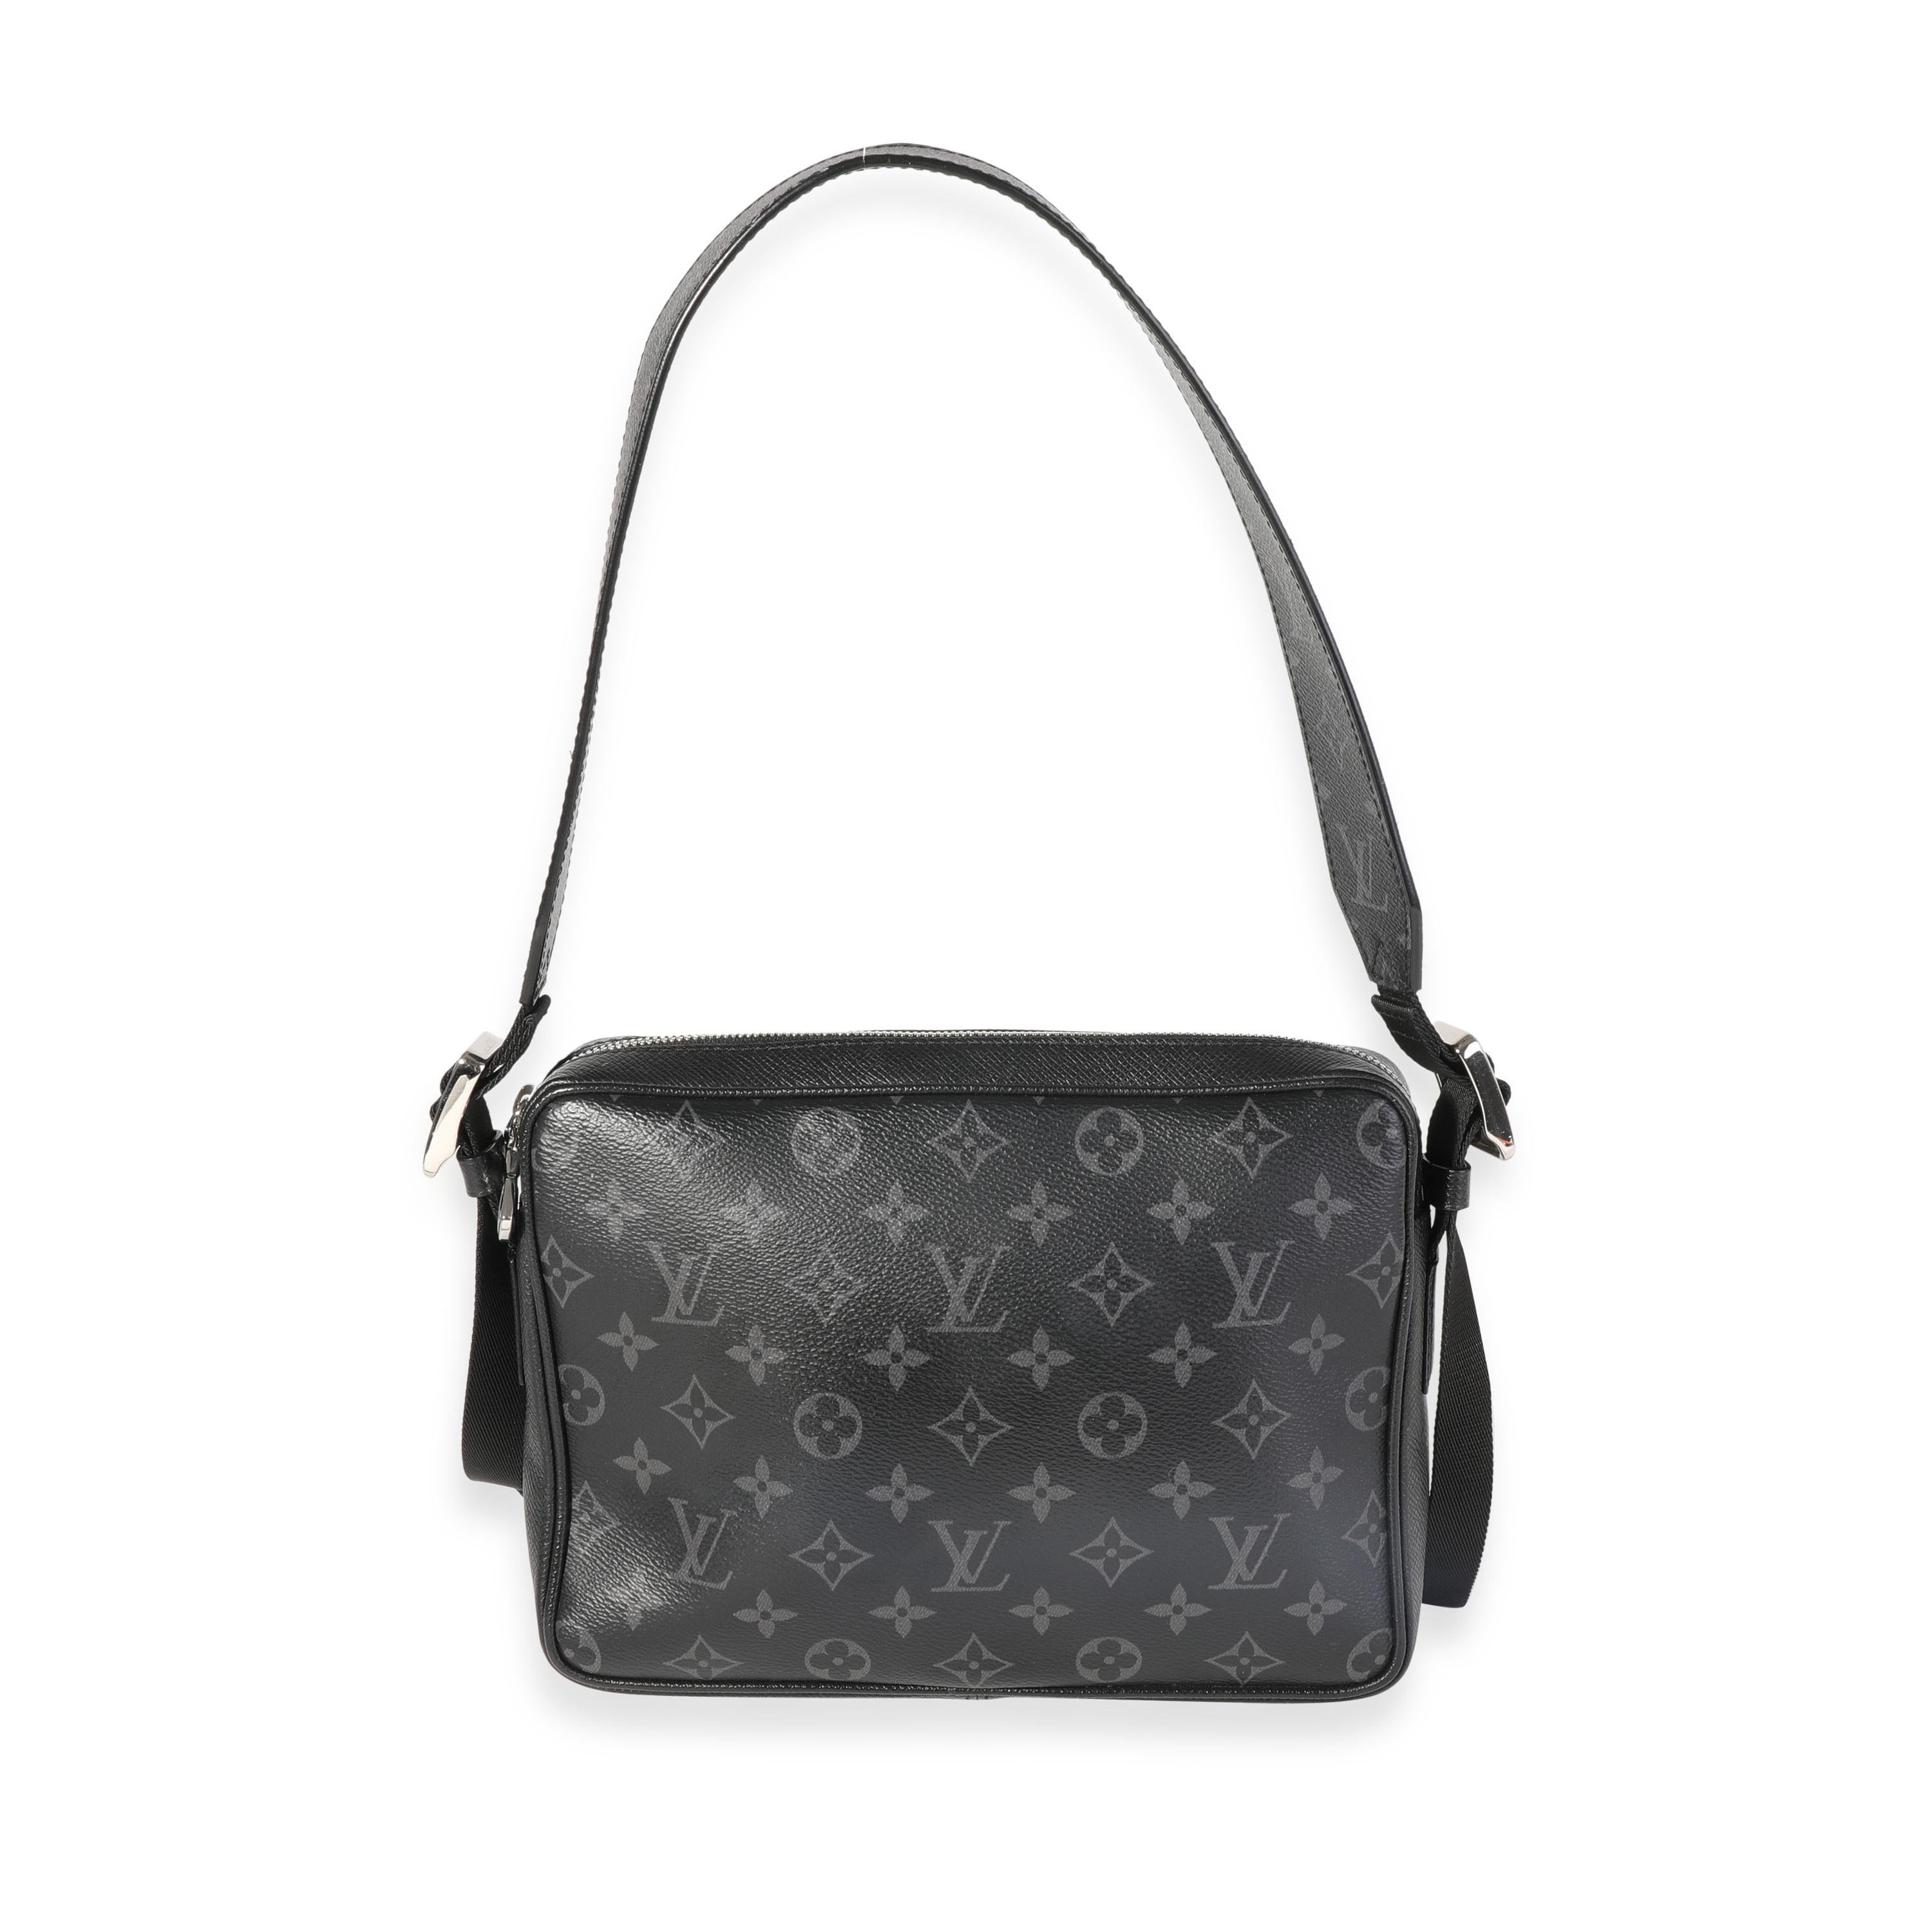 Listing Title: Louis Vuitton Black Taigarama & Monogram Eclipse Canvas Outdoor Messenger
SKU: 120220
MSRP: 2230.00
Condition: Pre-owned 
Handbag Condition: Very Good
Condition Comments: Very Good Condition. Faint wear to corners. Scratching to